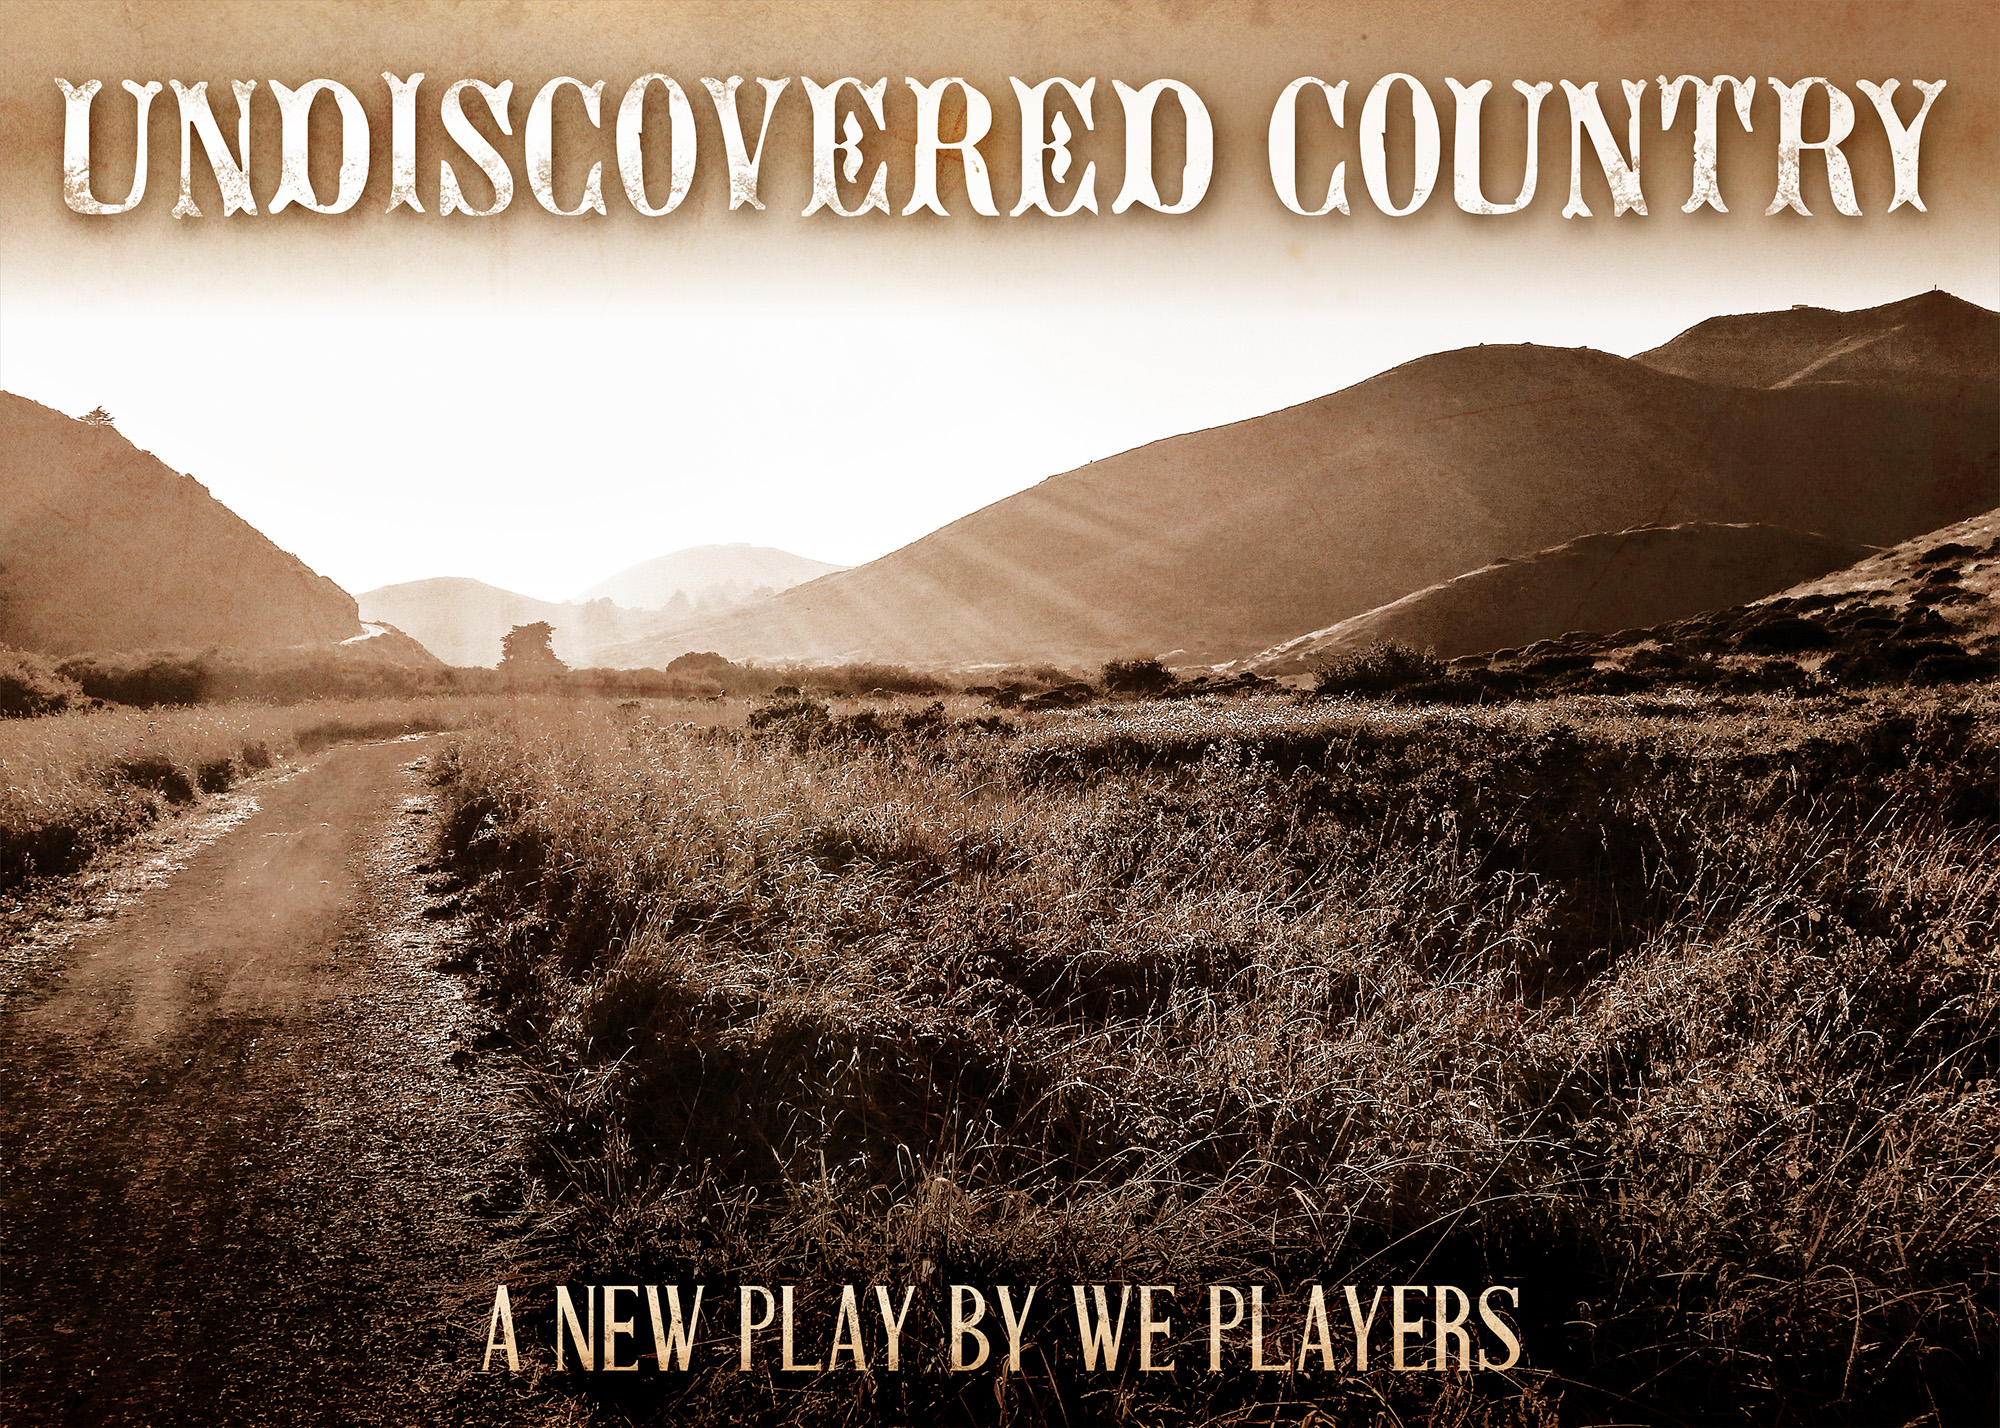 We Players - Undiscovered Country 2019 - Postcard - Front - Screen - 2000px.jpg